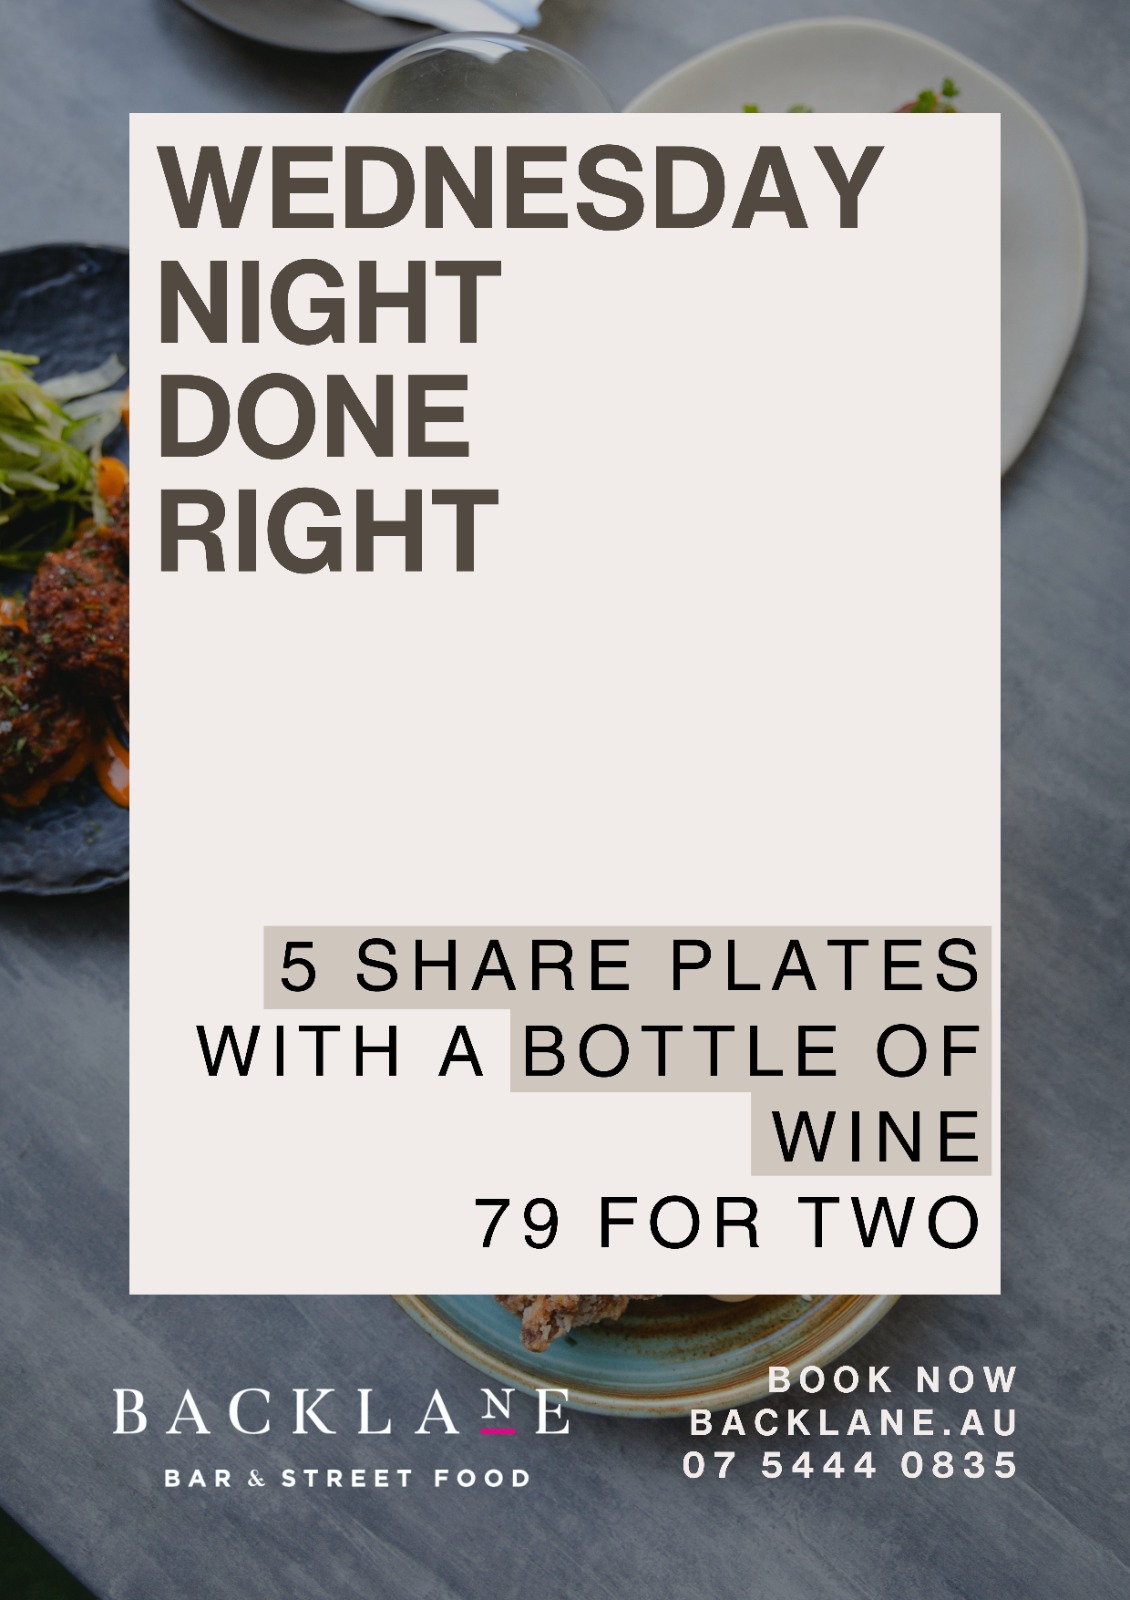 Shake things up with our Wednesday Night Done Right deal